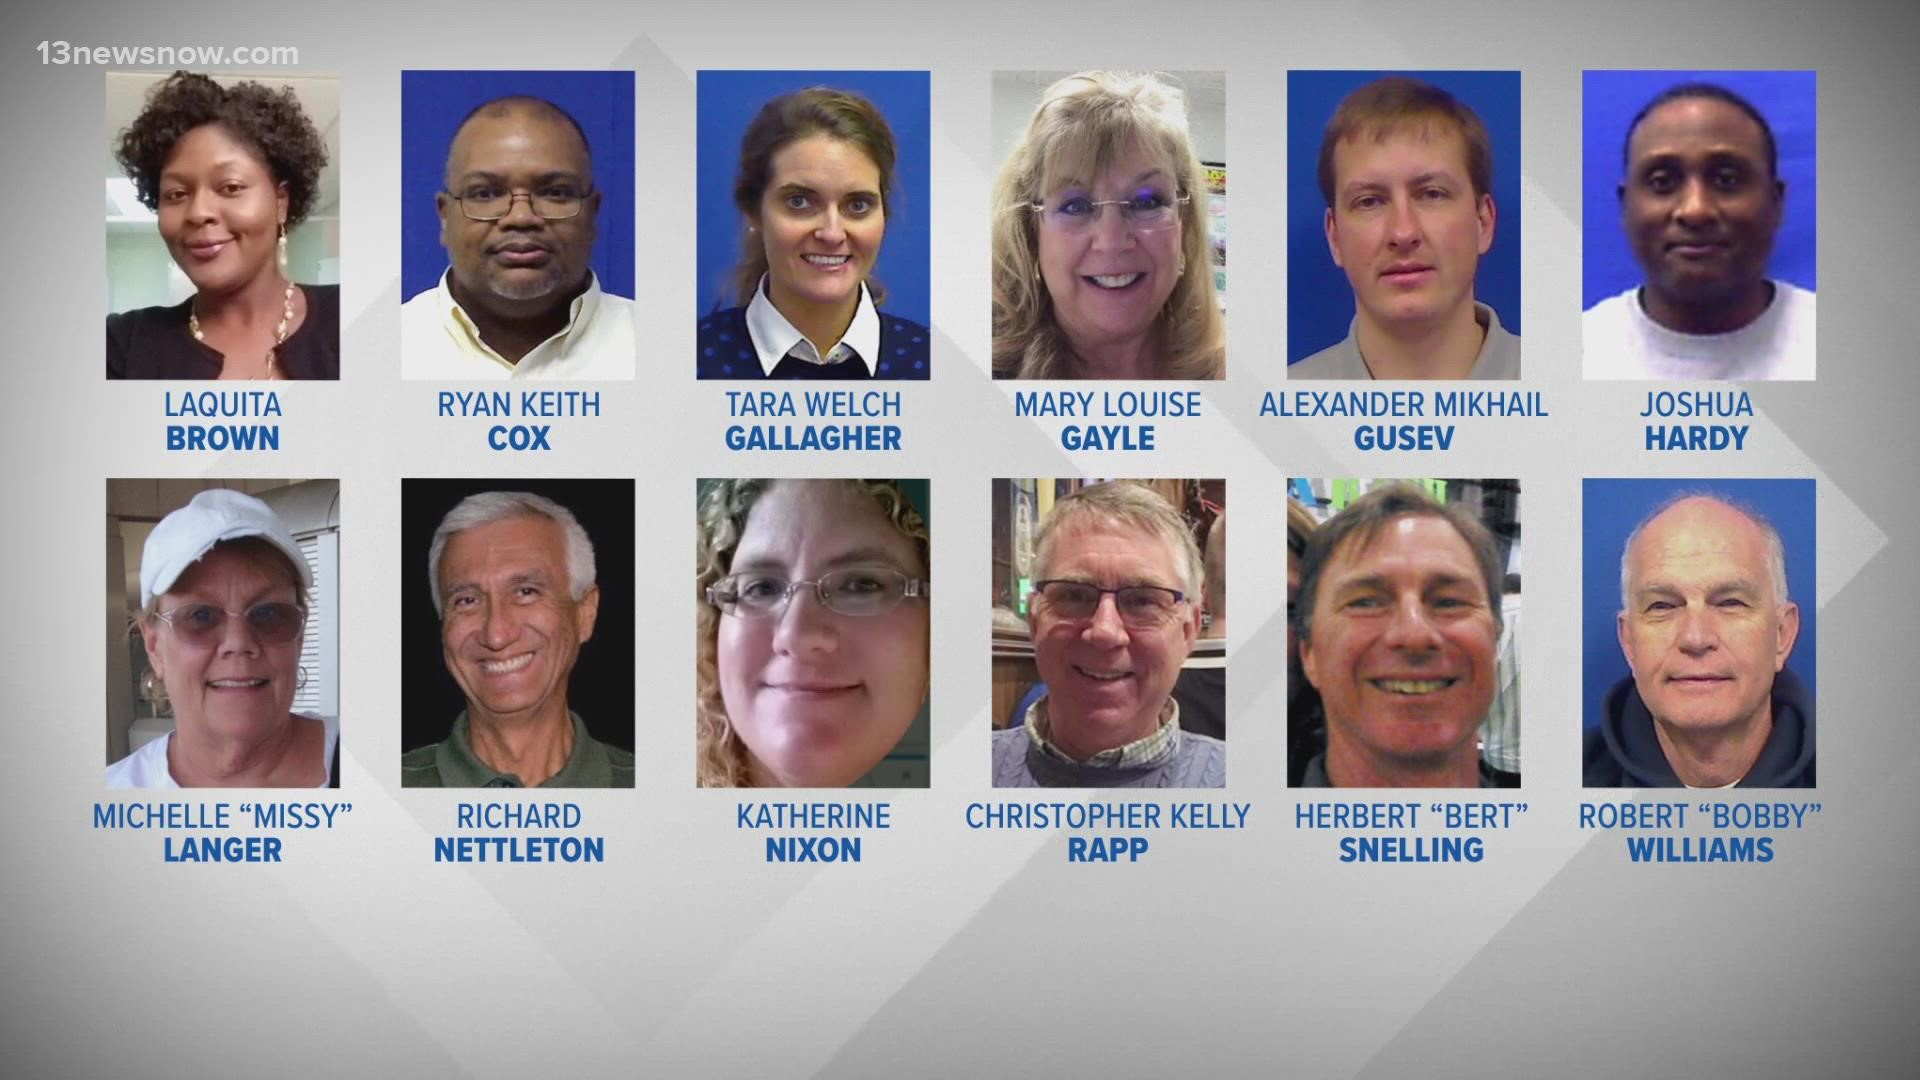 On May 31, 2019, a disgruntled city employee shot and killed 12 people at the Virginia Beach Municipal Center. They were mothers, fathers, co-workers and friends.